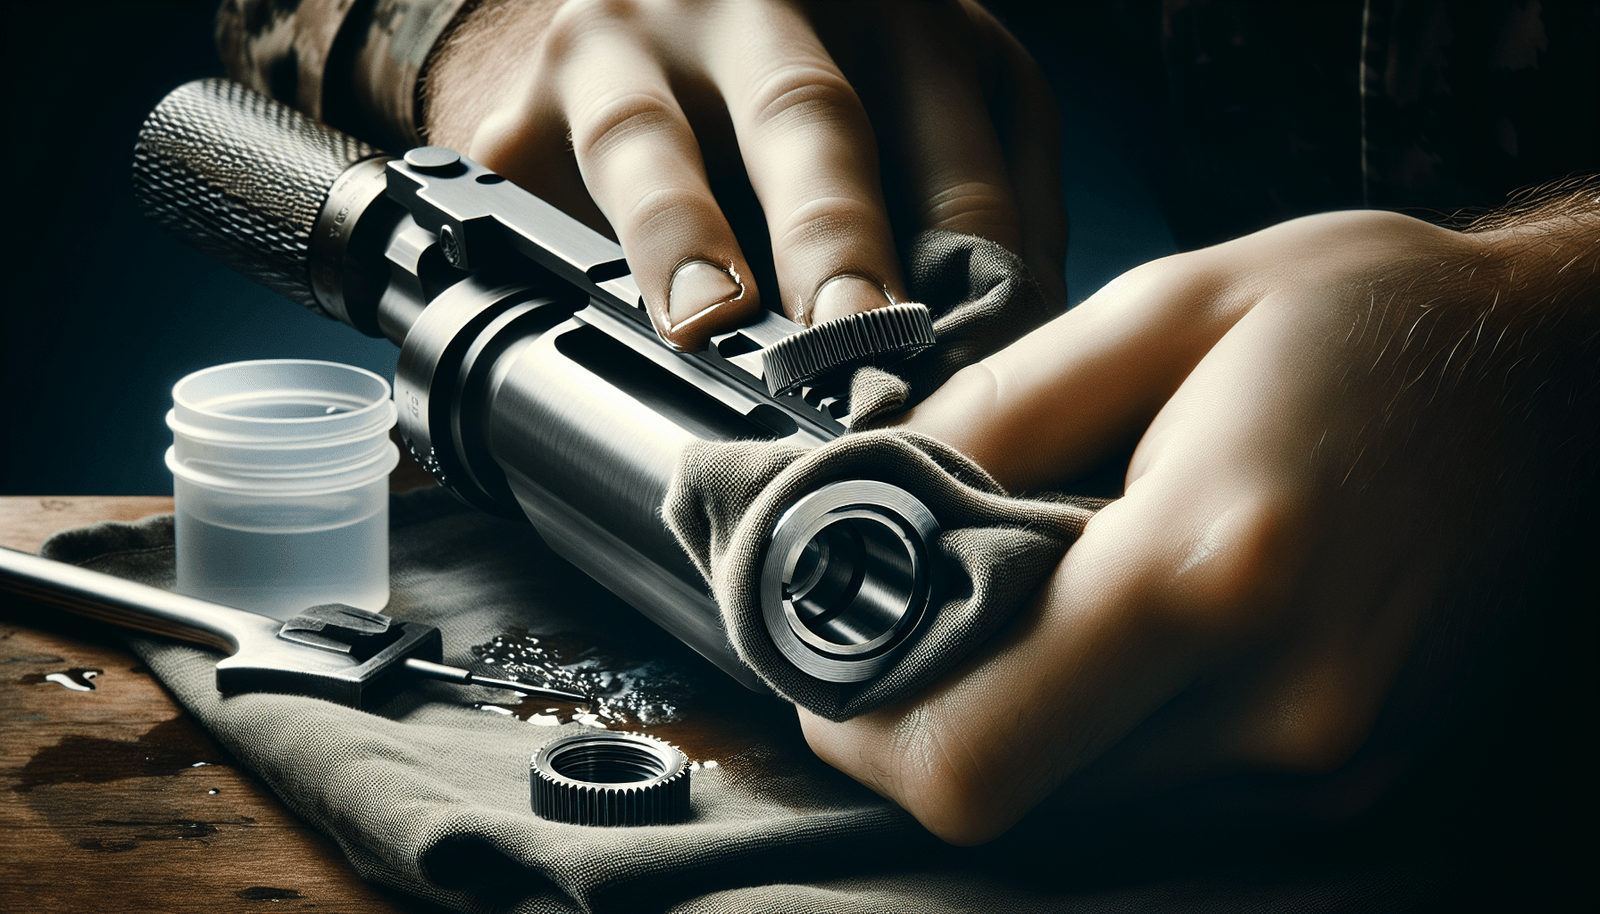 Top 10 Gun Cleaning Solvents And Lubricants For Beginners